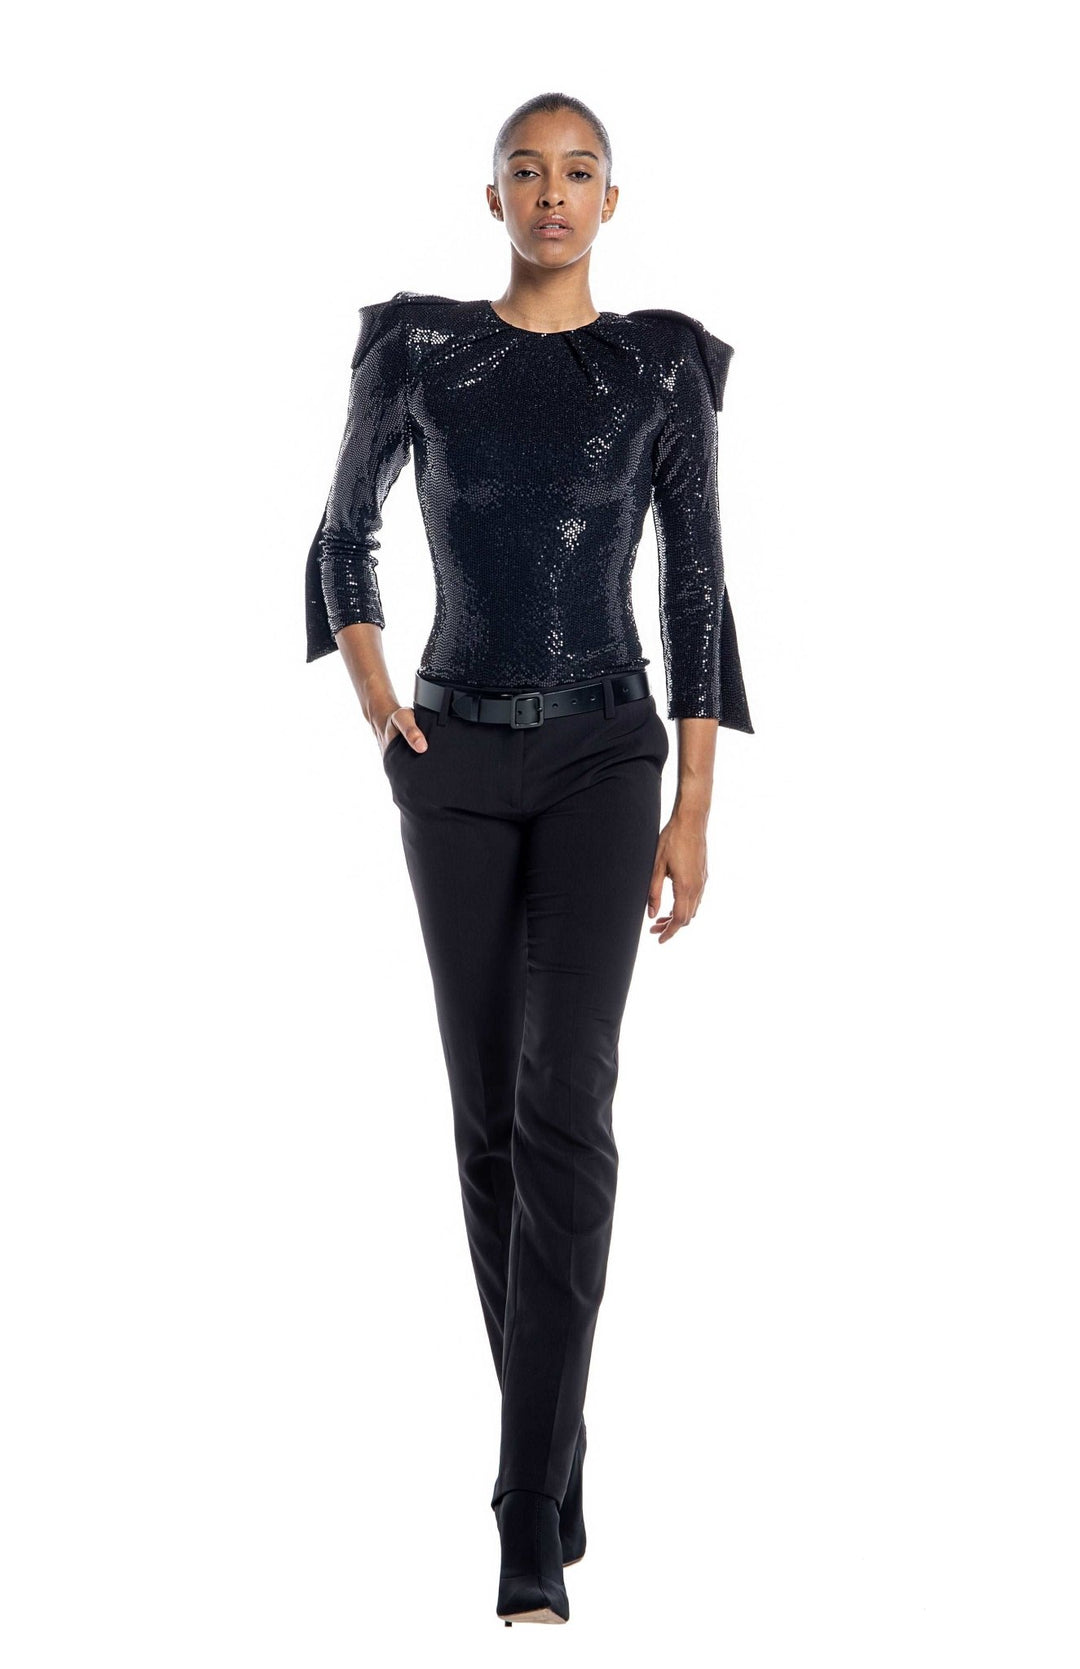 Chic, black, high shoulder, sequin bodysuit, with draped sleeves, closed neck and high shoulderpads.